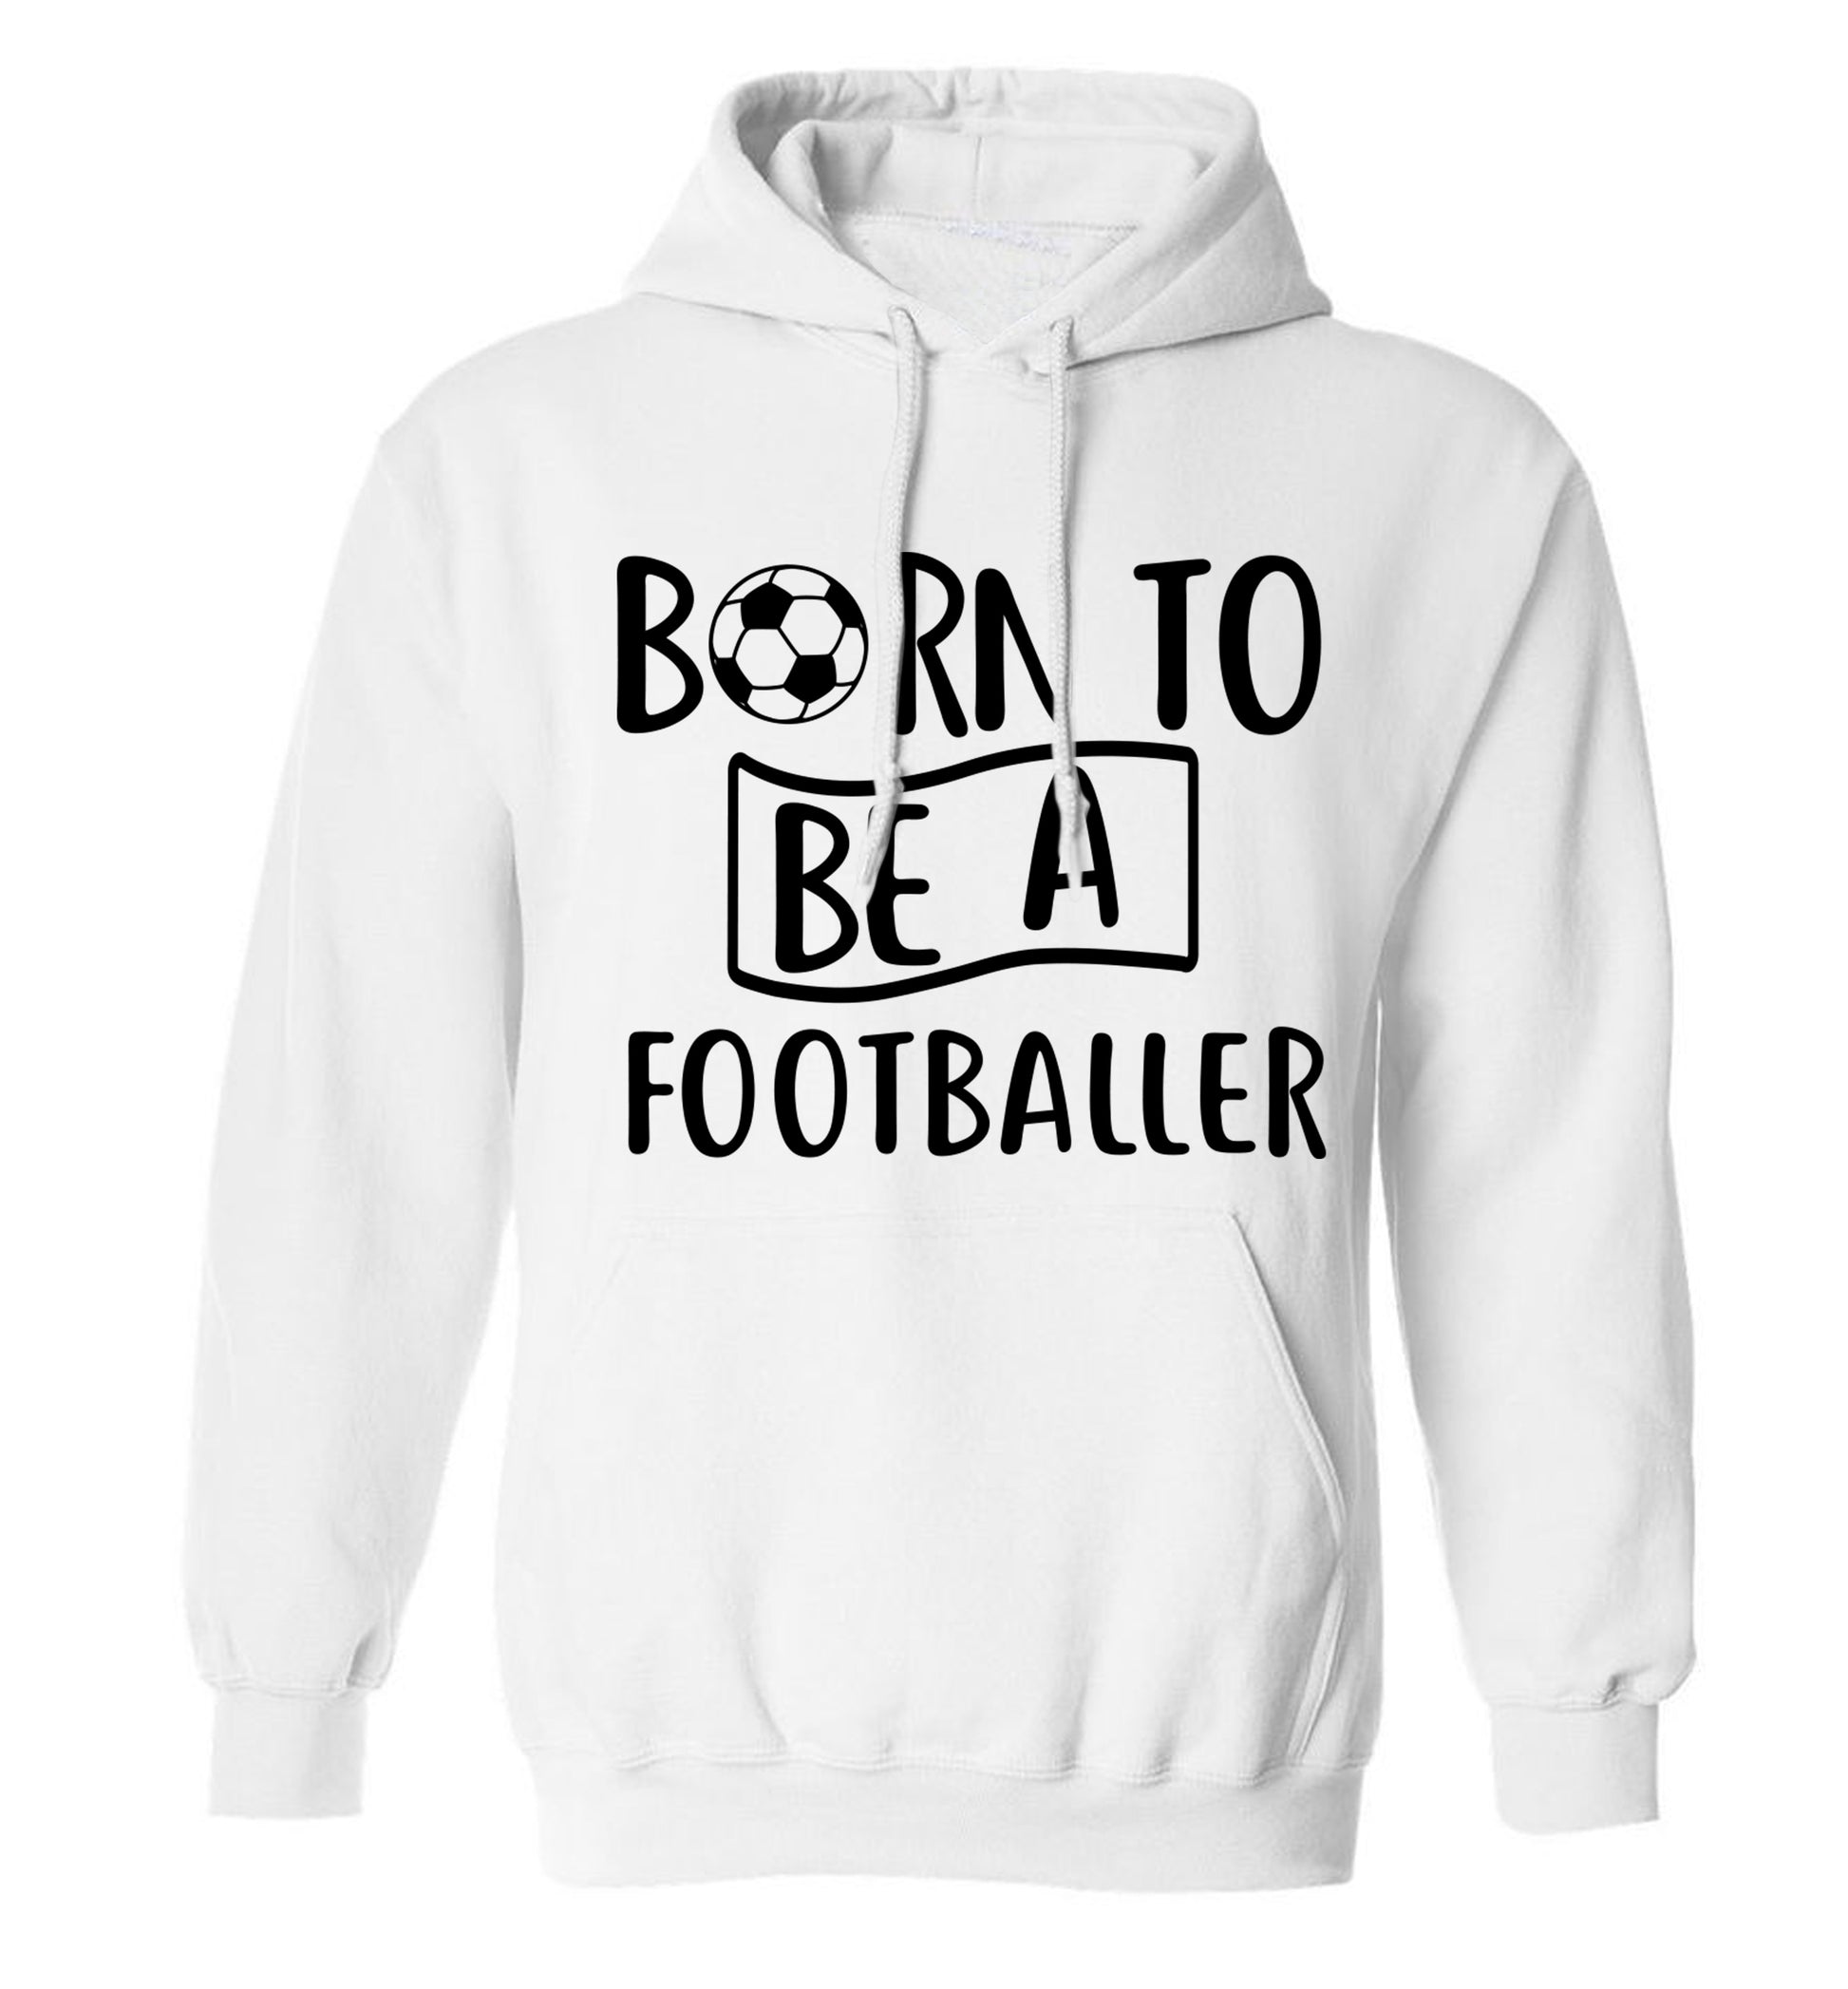 Born to be a footballer adults unisexwhite hoodie 2XL